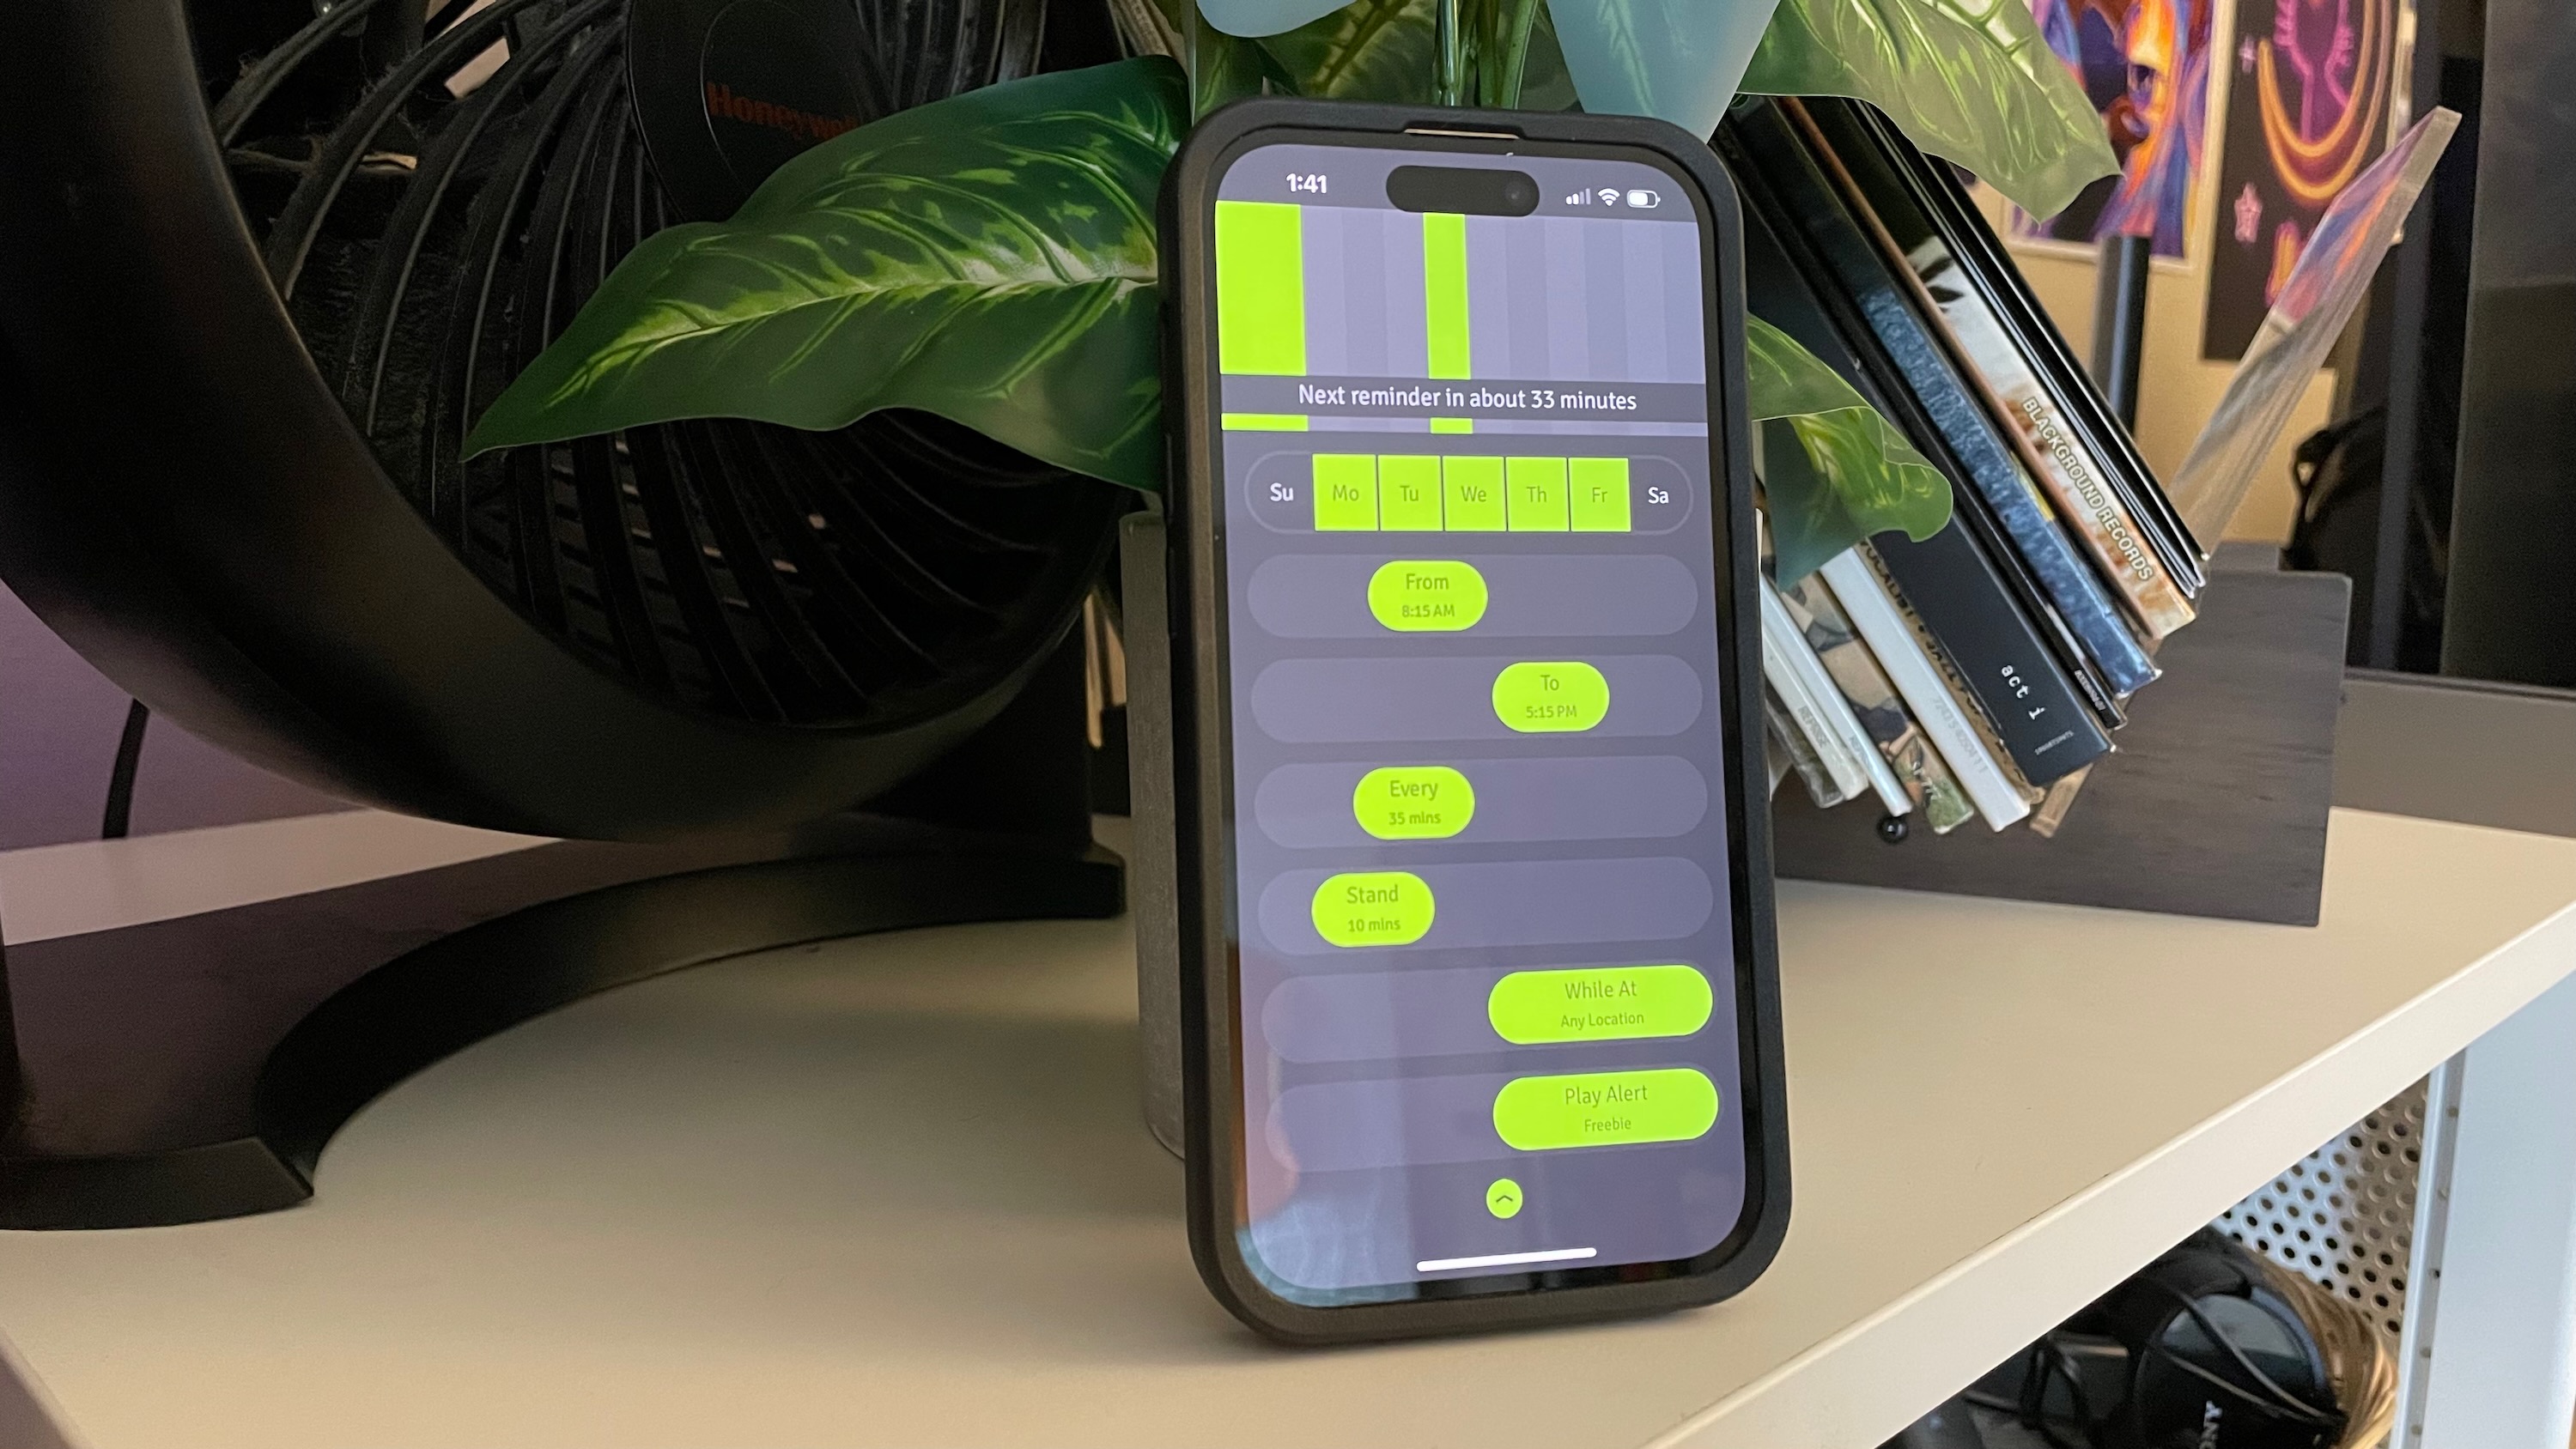 The Stand Up! app for iOS, showing custom settings for when to stand up at custom lengths and frequencies.